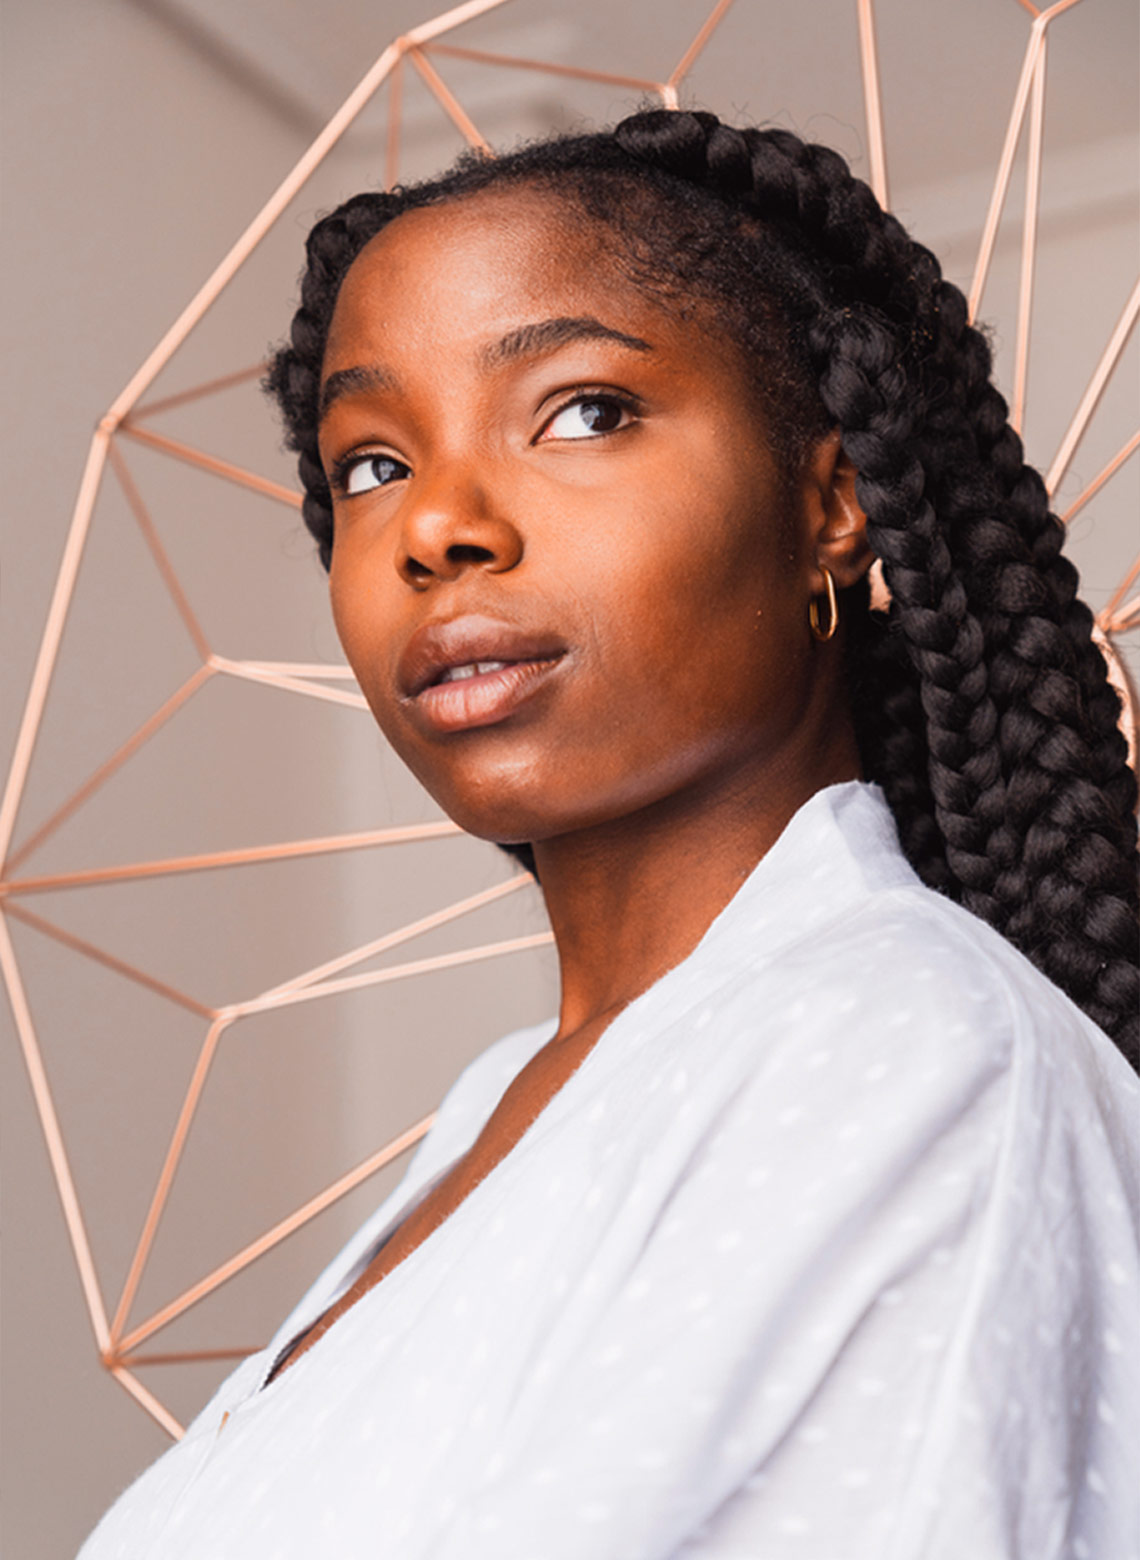 person wearing white blouse with subtle polka dot details, hoop earrings, and jumbo box braids while standing in front of a rose gold geometric background